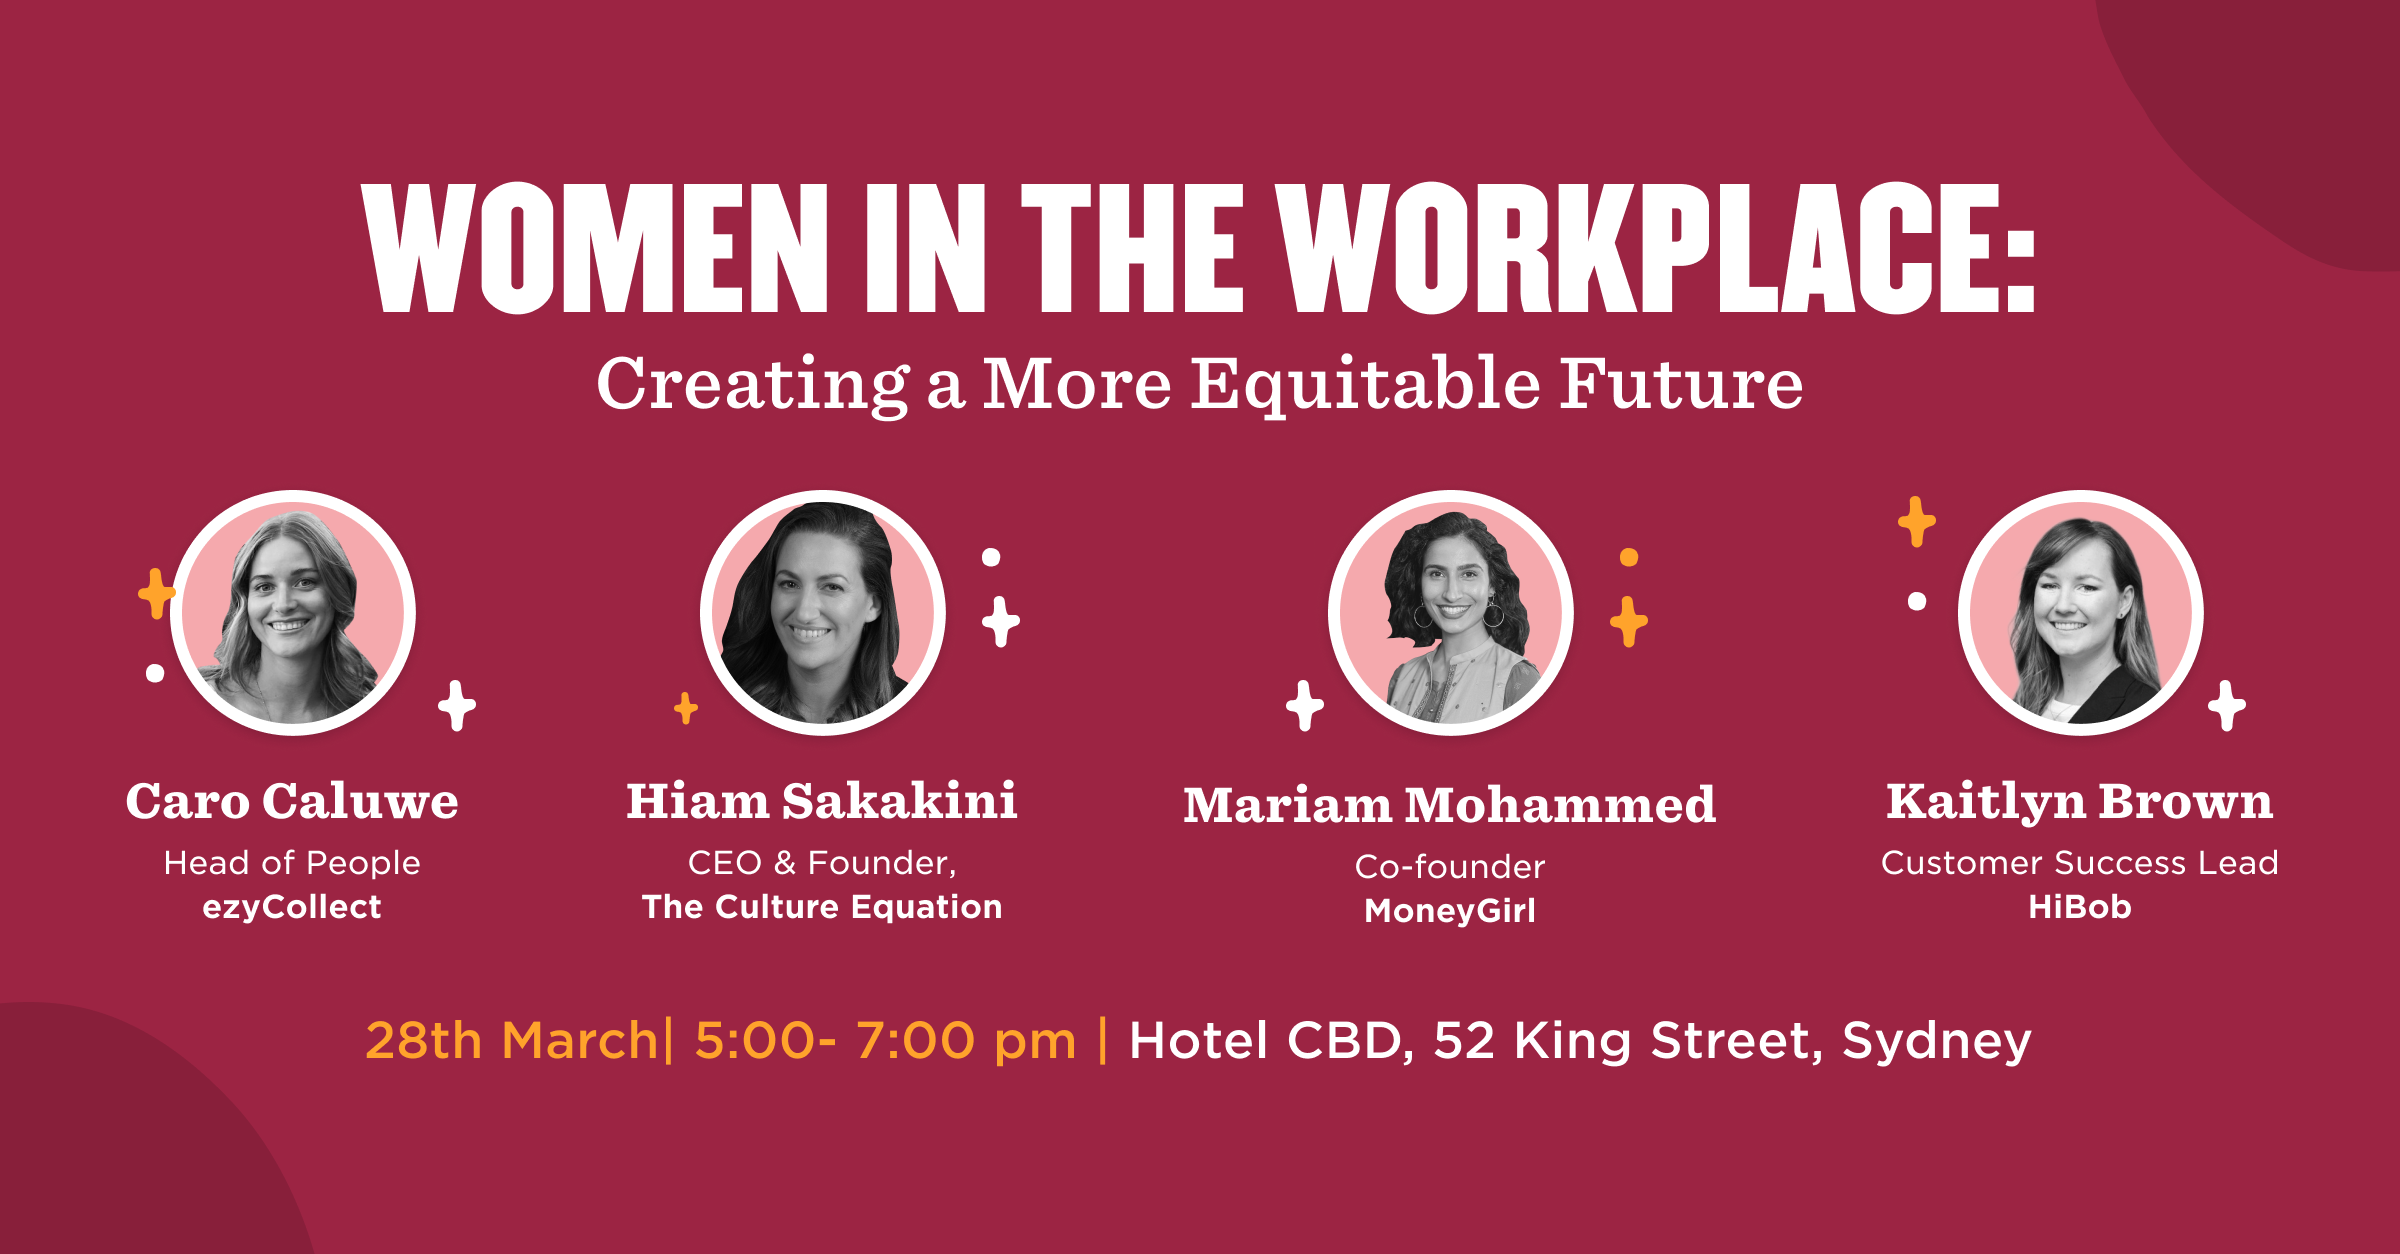 Women in the Workplace: Creating a More Equitable Future - Women-in-the-Workplace-AU_LP-banner_1200X627PX-1-1.png